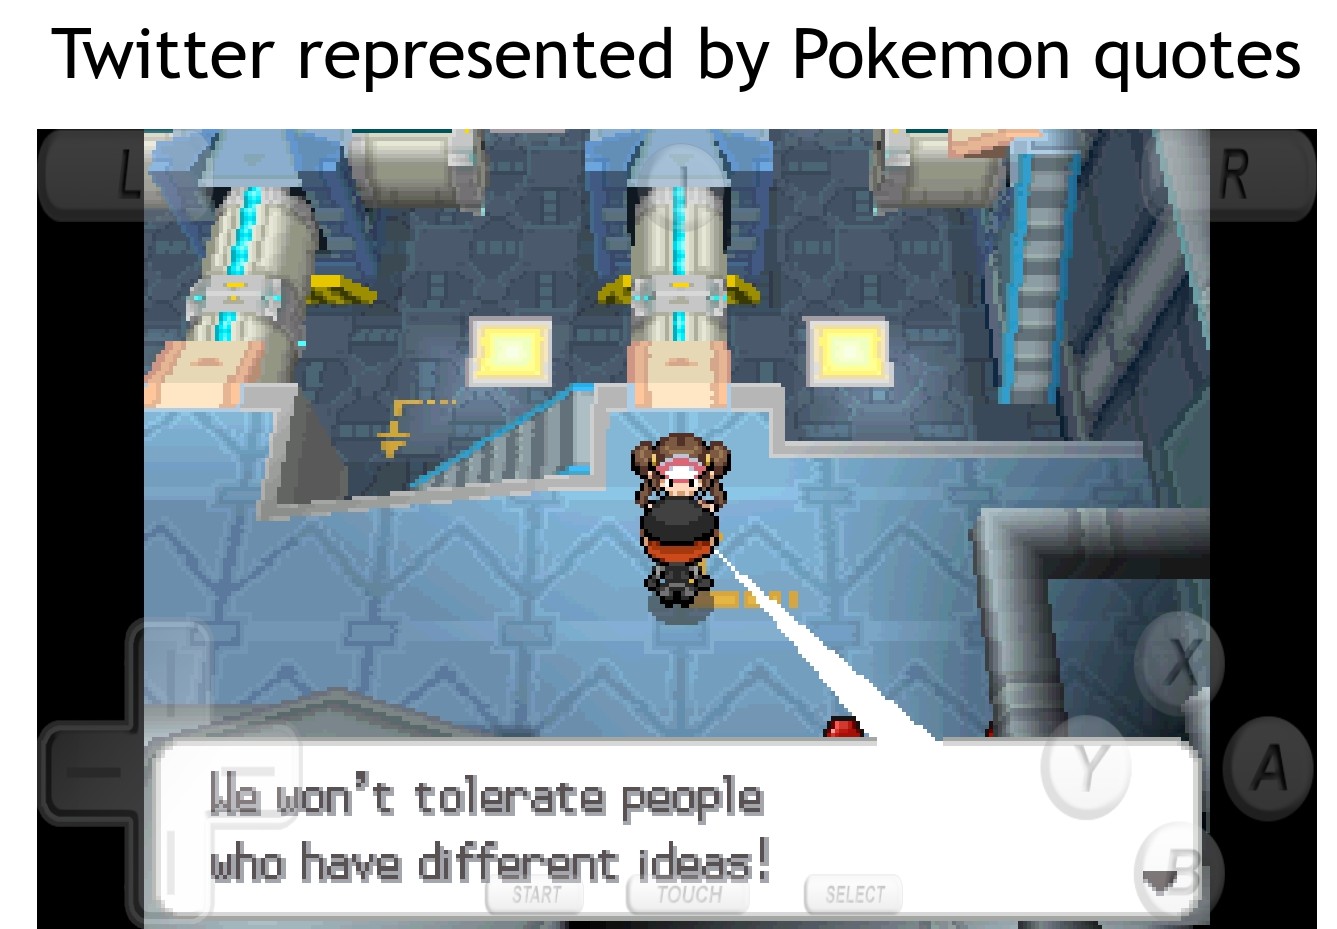 games - Twitter represented by Pokemon quotes R. Trit X He won't tolerate people who have different ideas! Start Touch Select